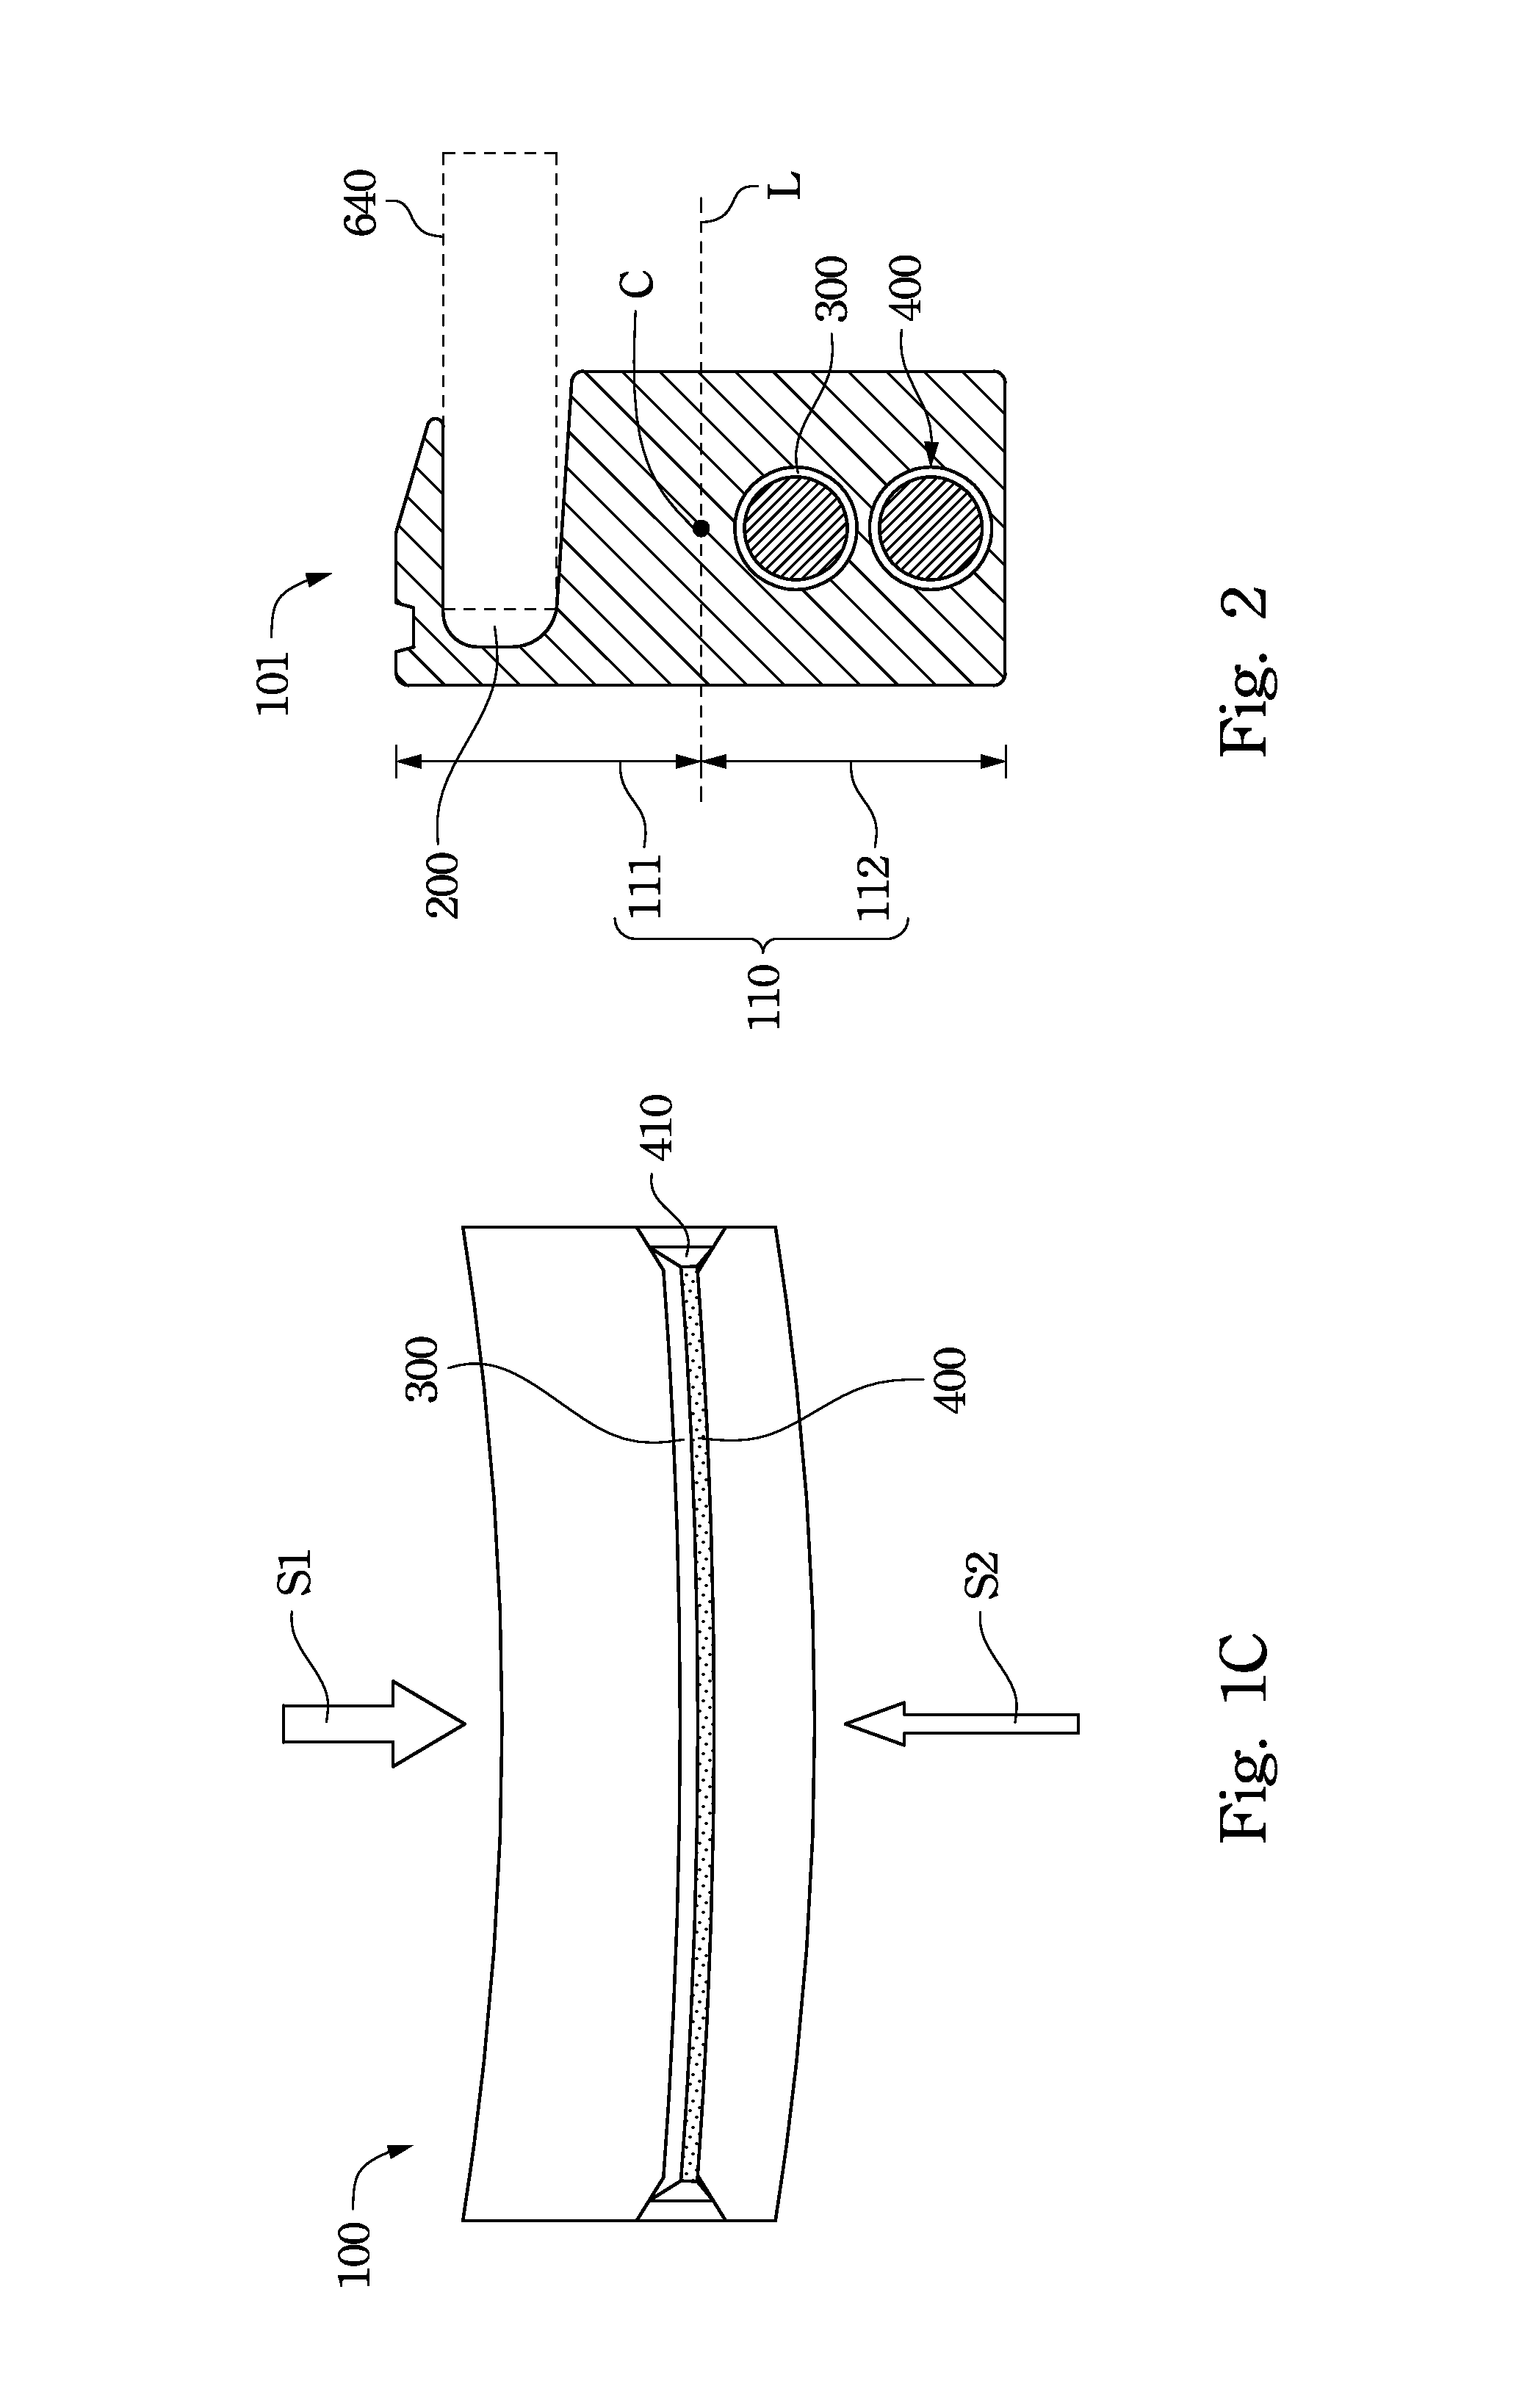 Photovoltaic array system, photovoltaic device thereof, and frame element of photovoltaic device thereof